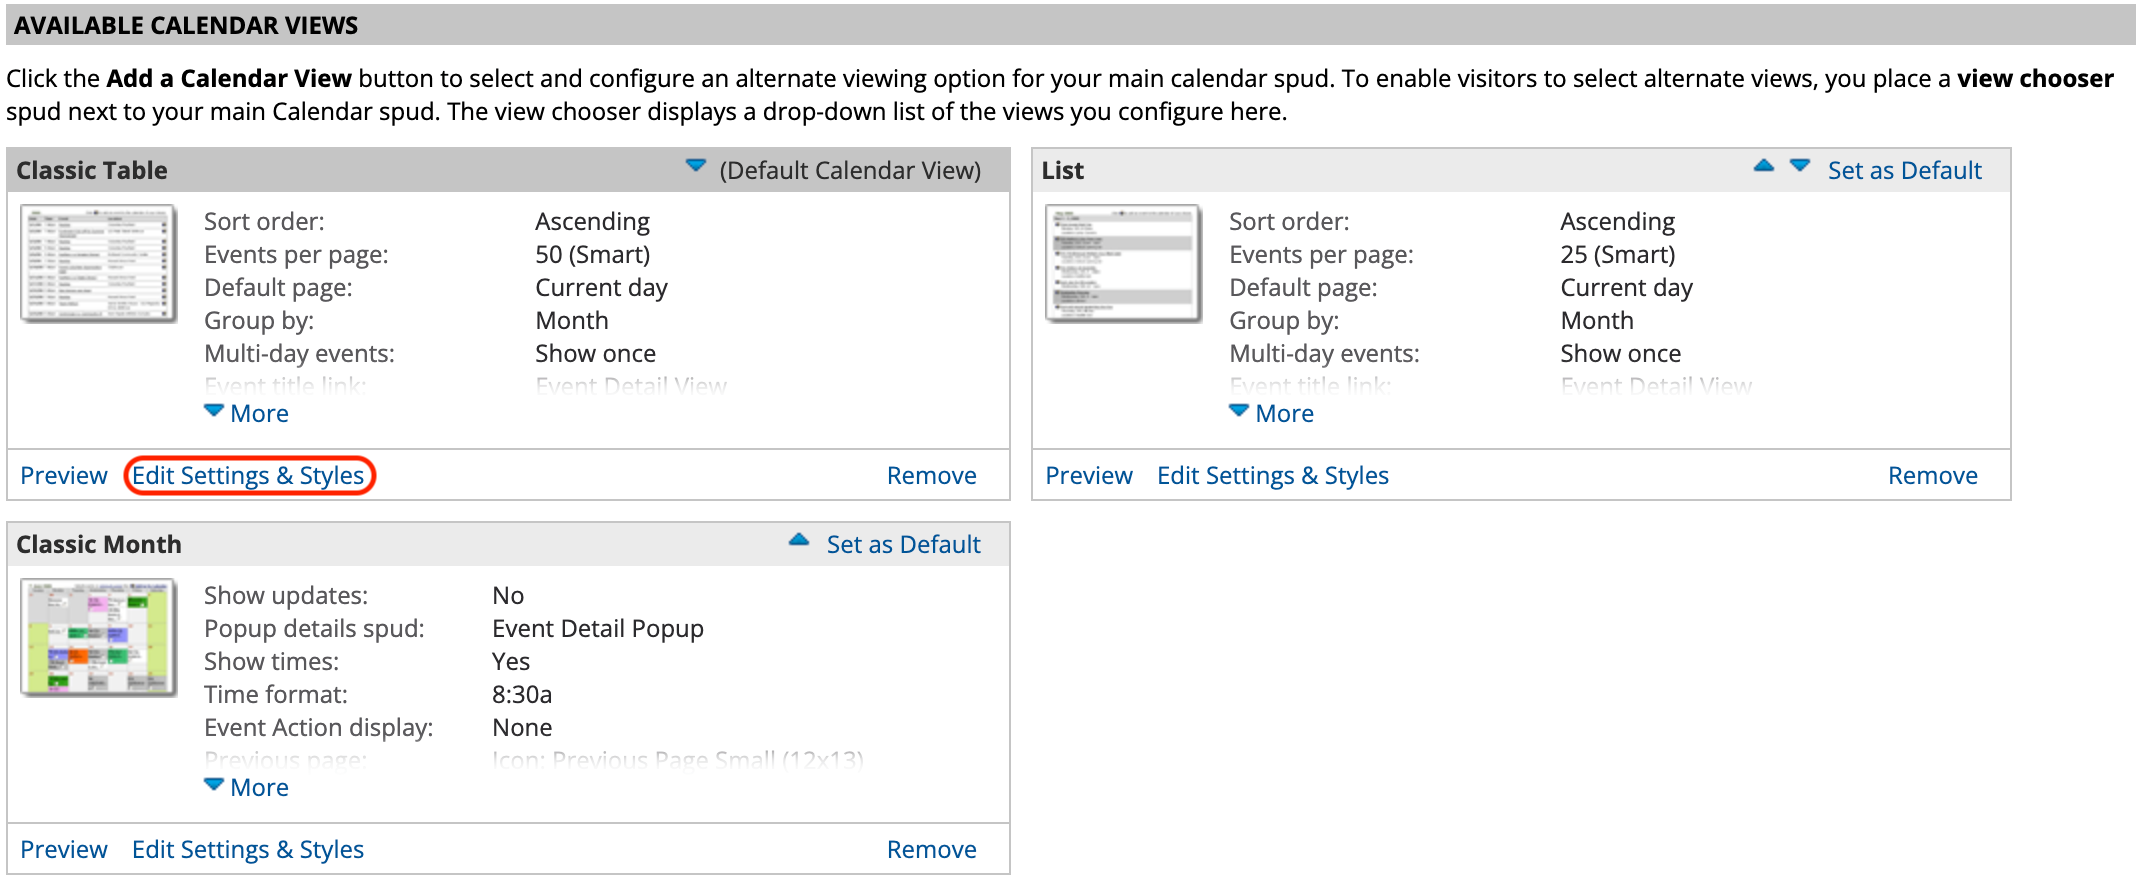 Edit settings and styles button under each calendar view